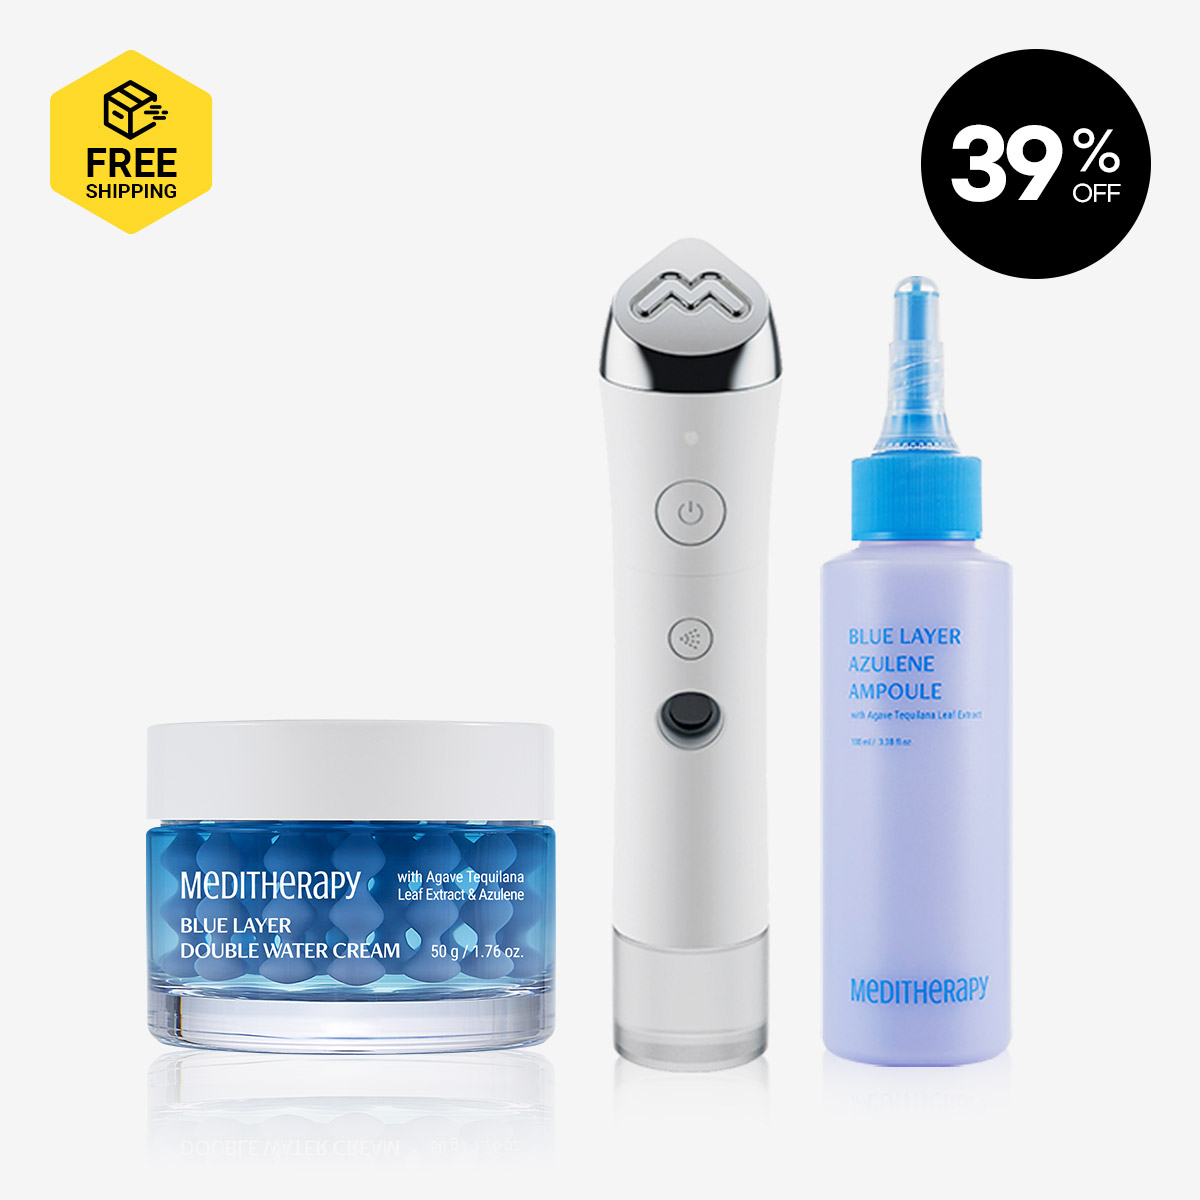 [MEDITHERAPY] Blue Layer Double Water Cream 1 + Ampoule Jet 1+ Azulene Ampoule 1